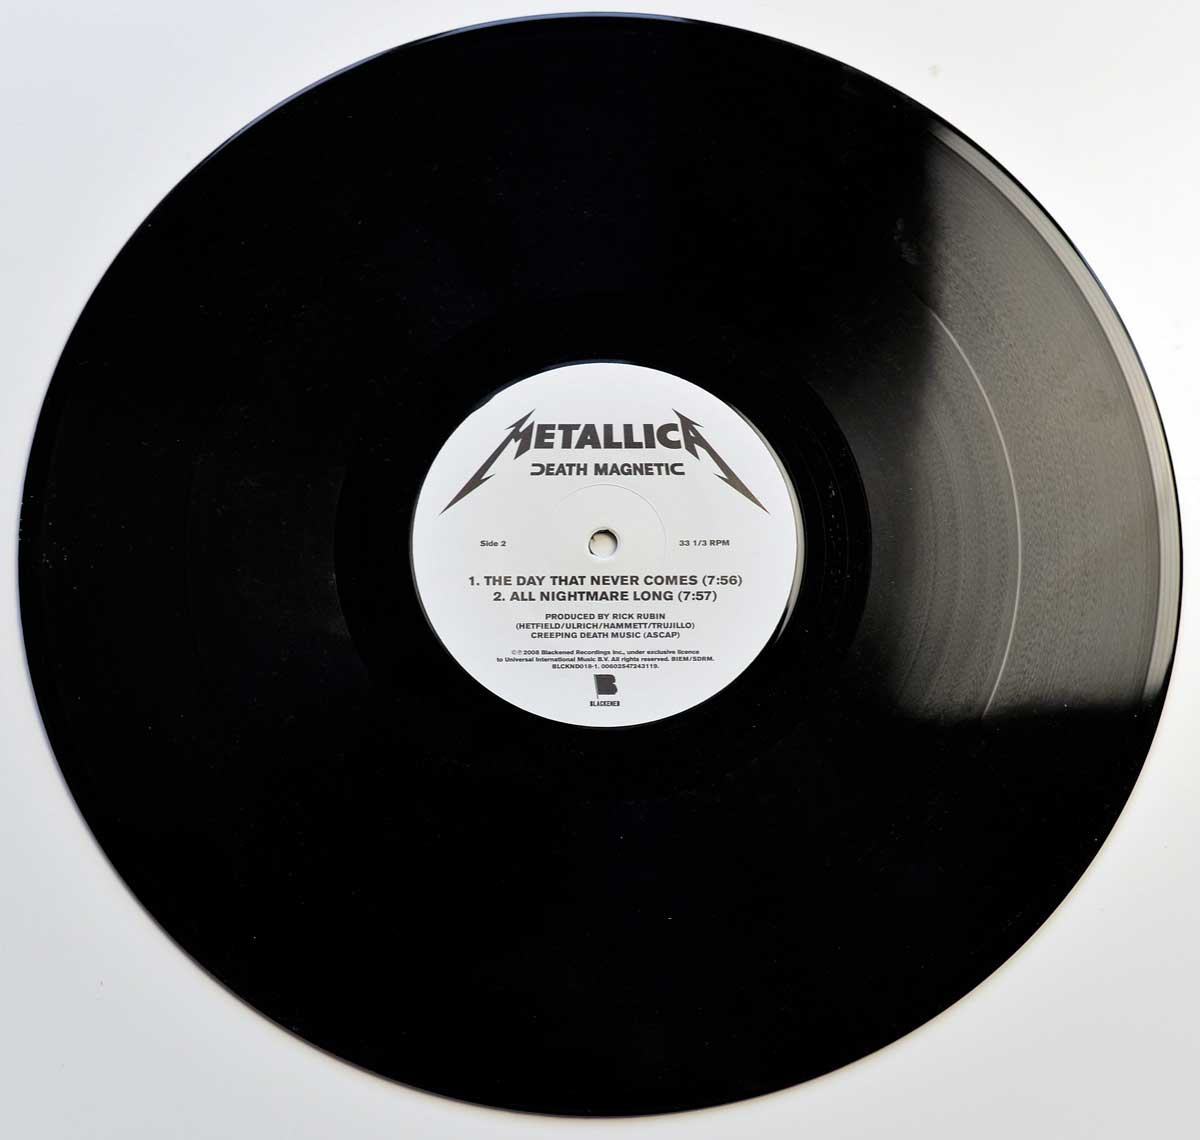 Photo of Side Two: of METALLICA - Death Magnetic Blackened Records Gatefold Cover 12" 